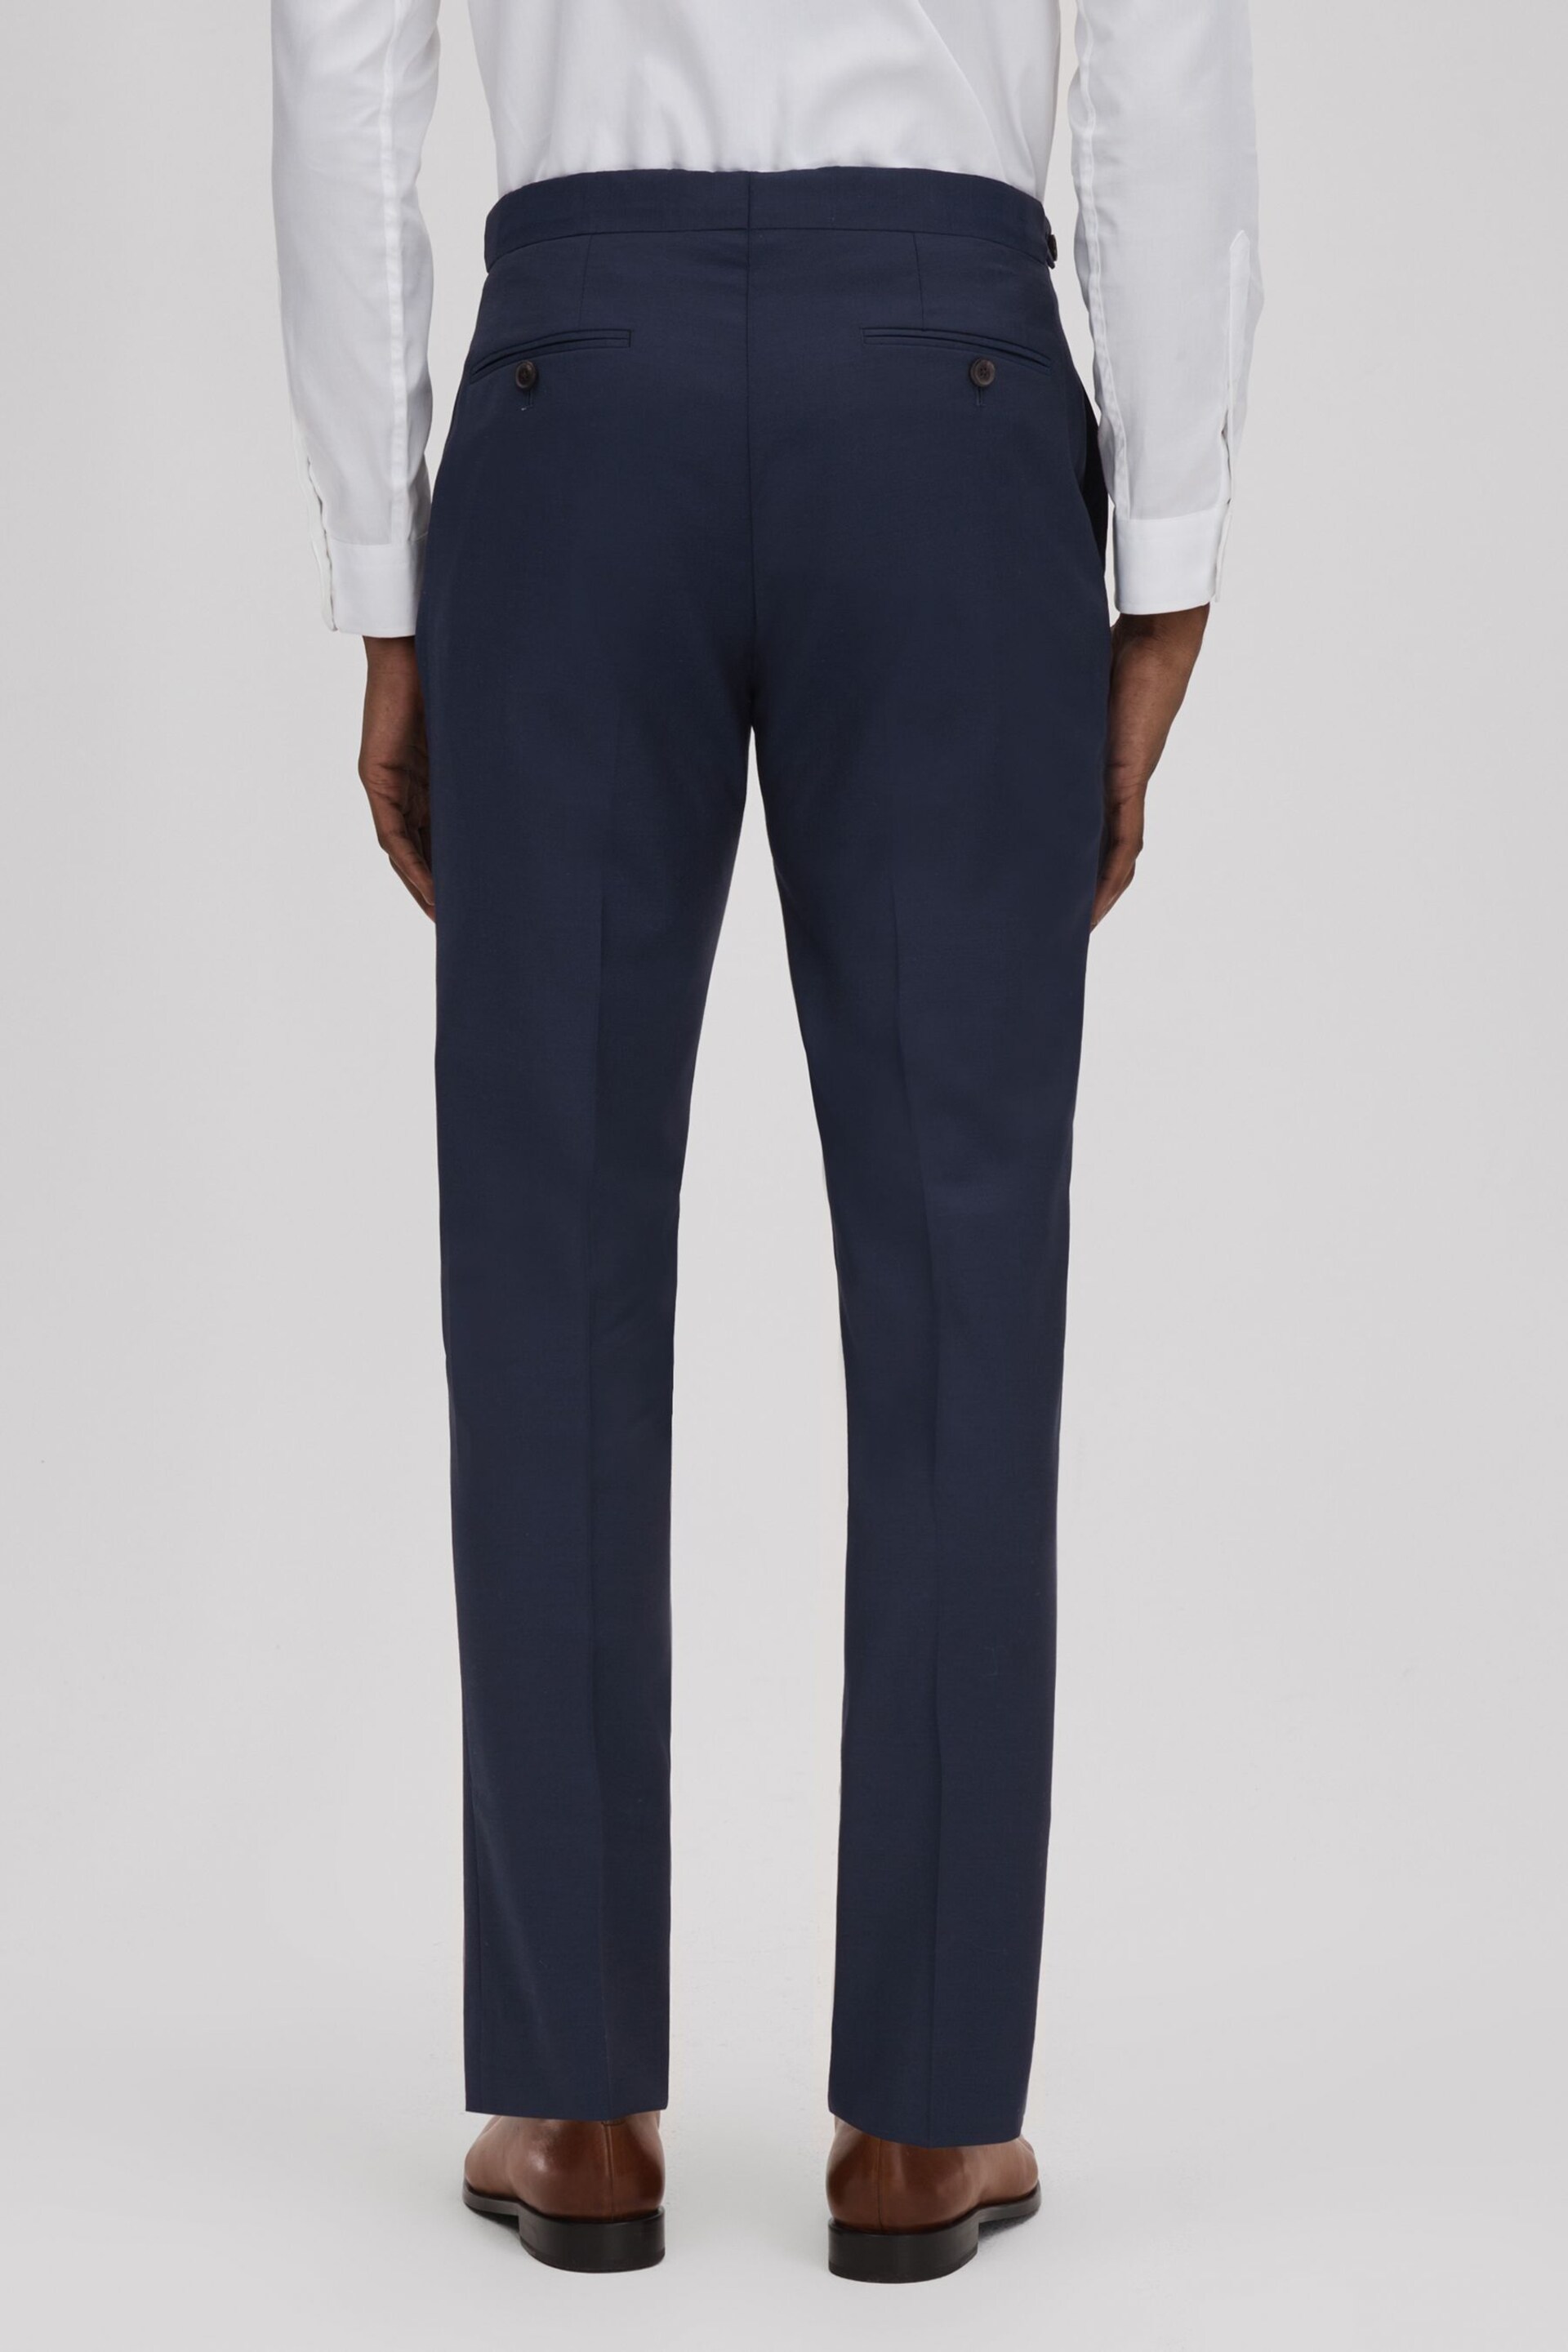 Reiss Navy Destiny Wool Side Adjuster Trousers - Image 5 of 5